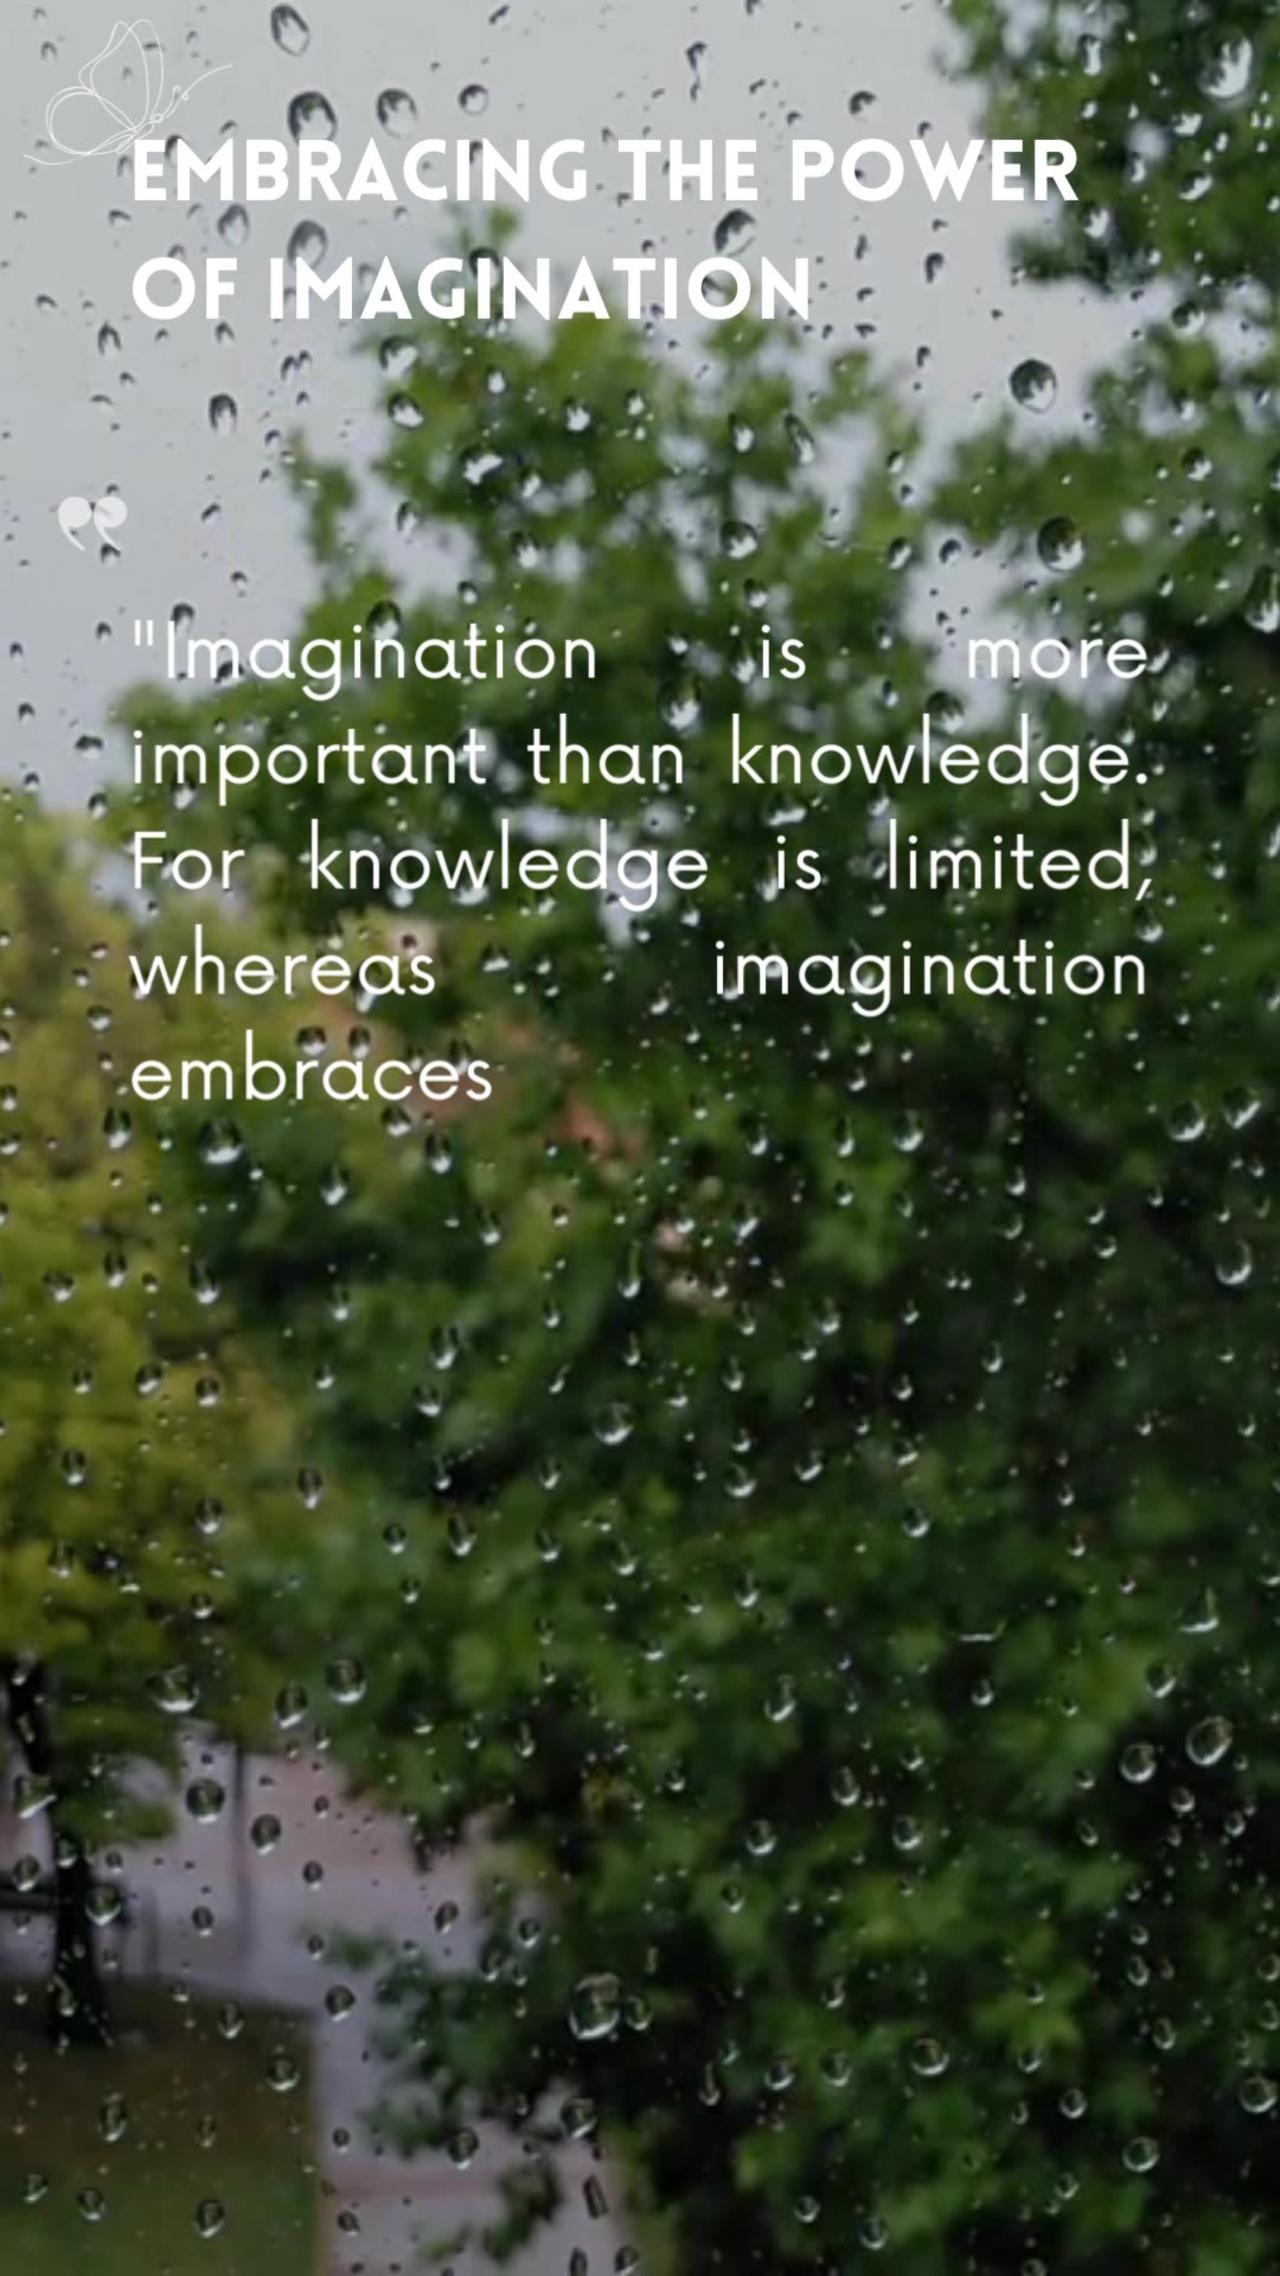 Embracing the power of imagination